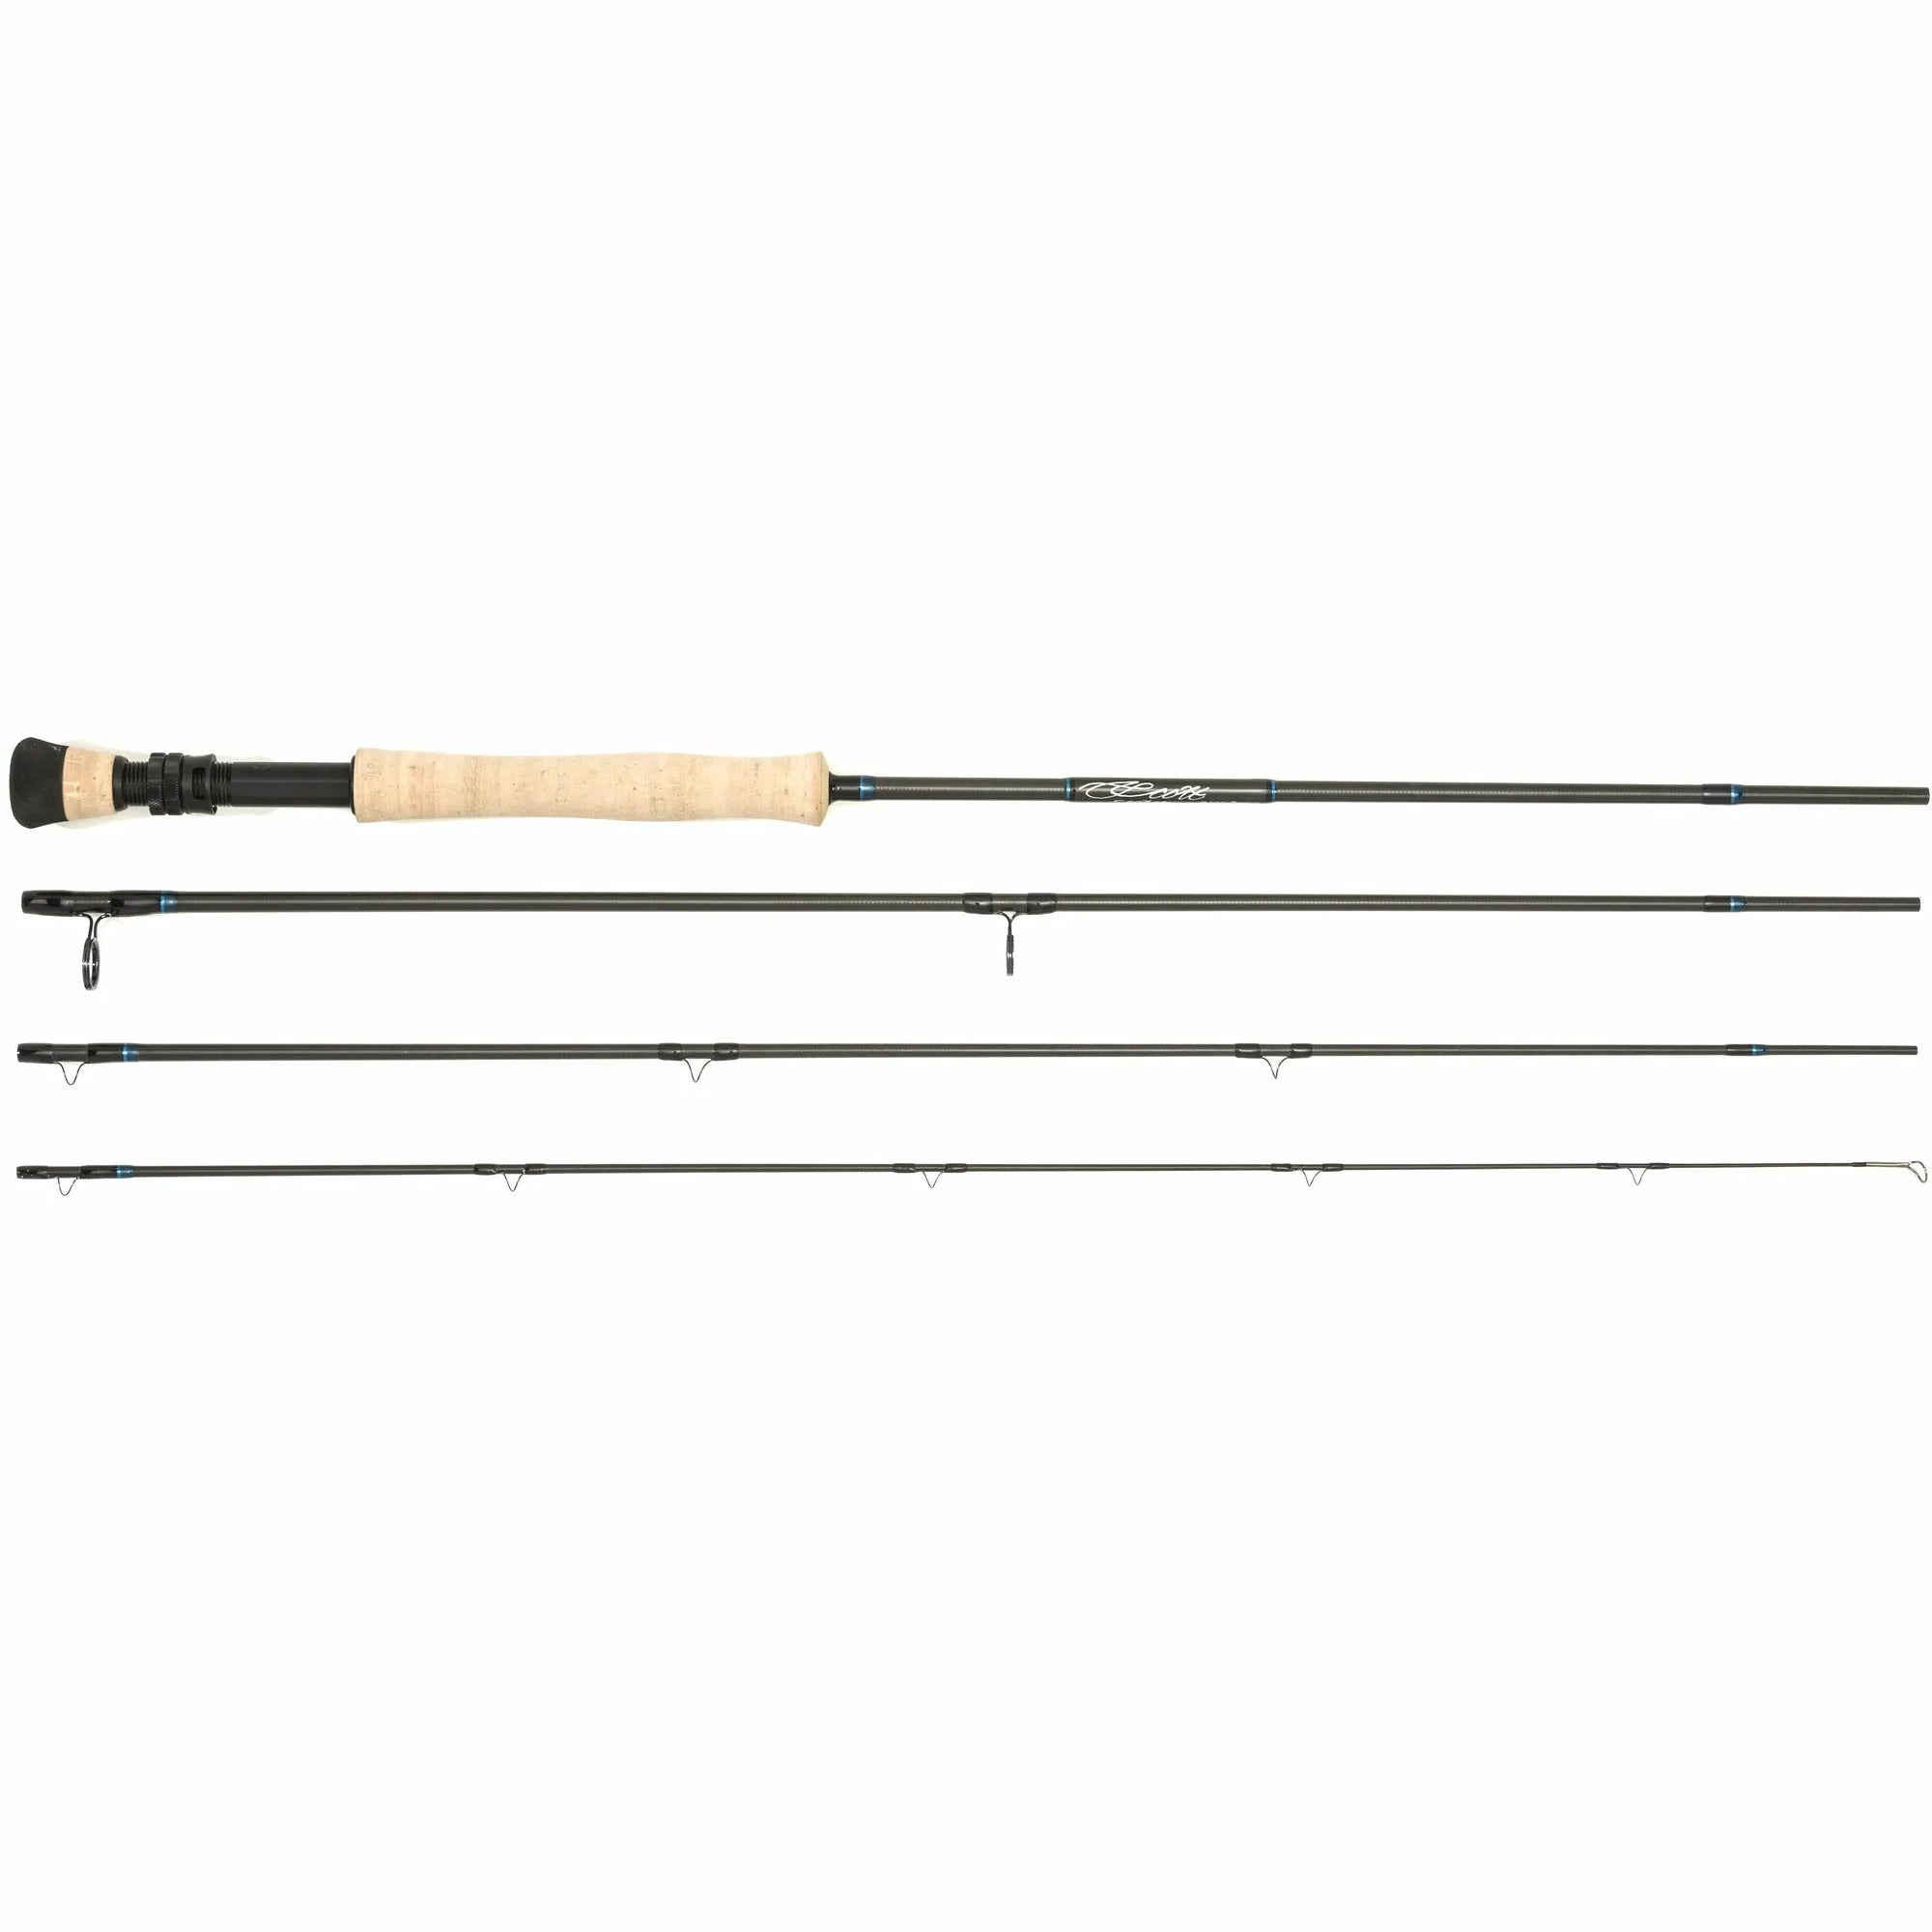 Scott Sector 12wt GT Giant Trevally Combo Fly Rod & Reel Outfit - NEW!